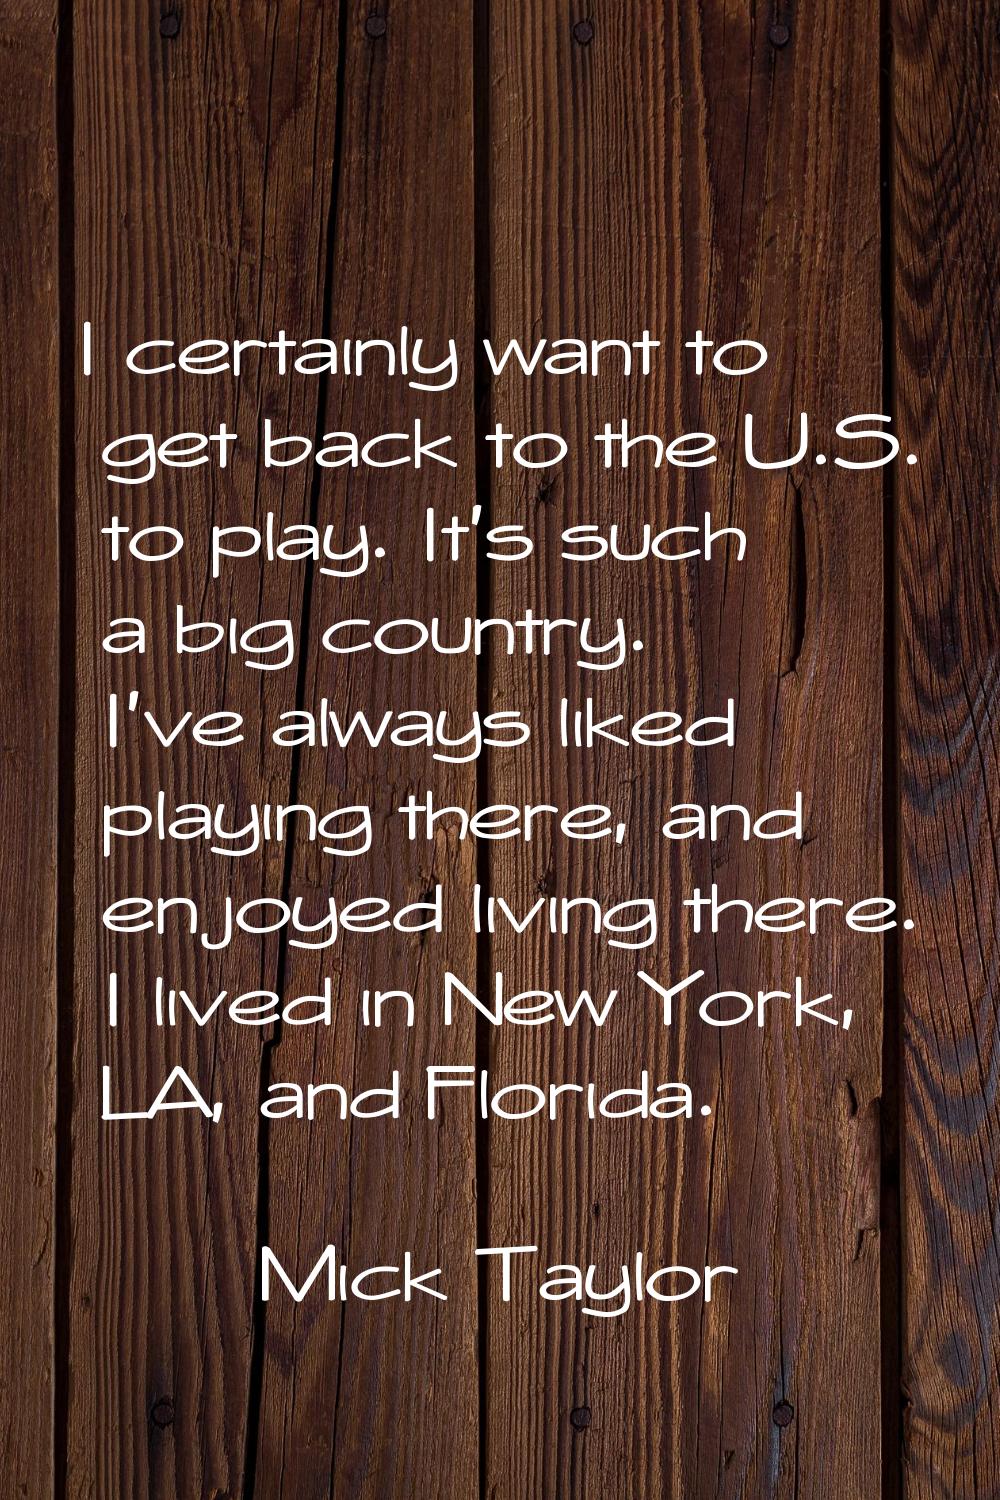 I certainly want to get back to the U.S. to play. It's such a big country. I've always liked playin